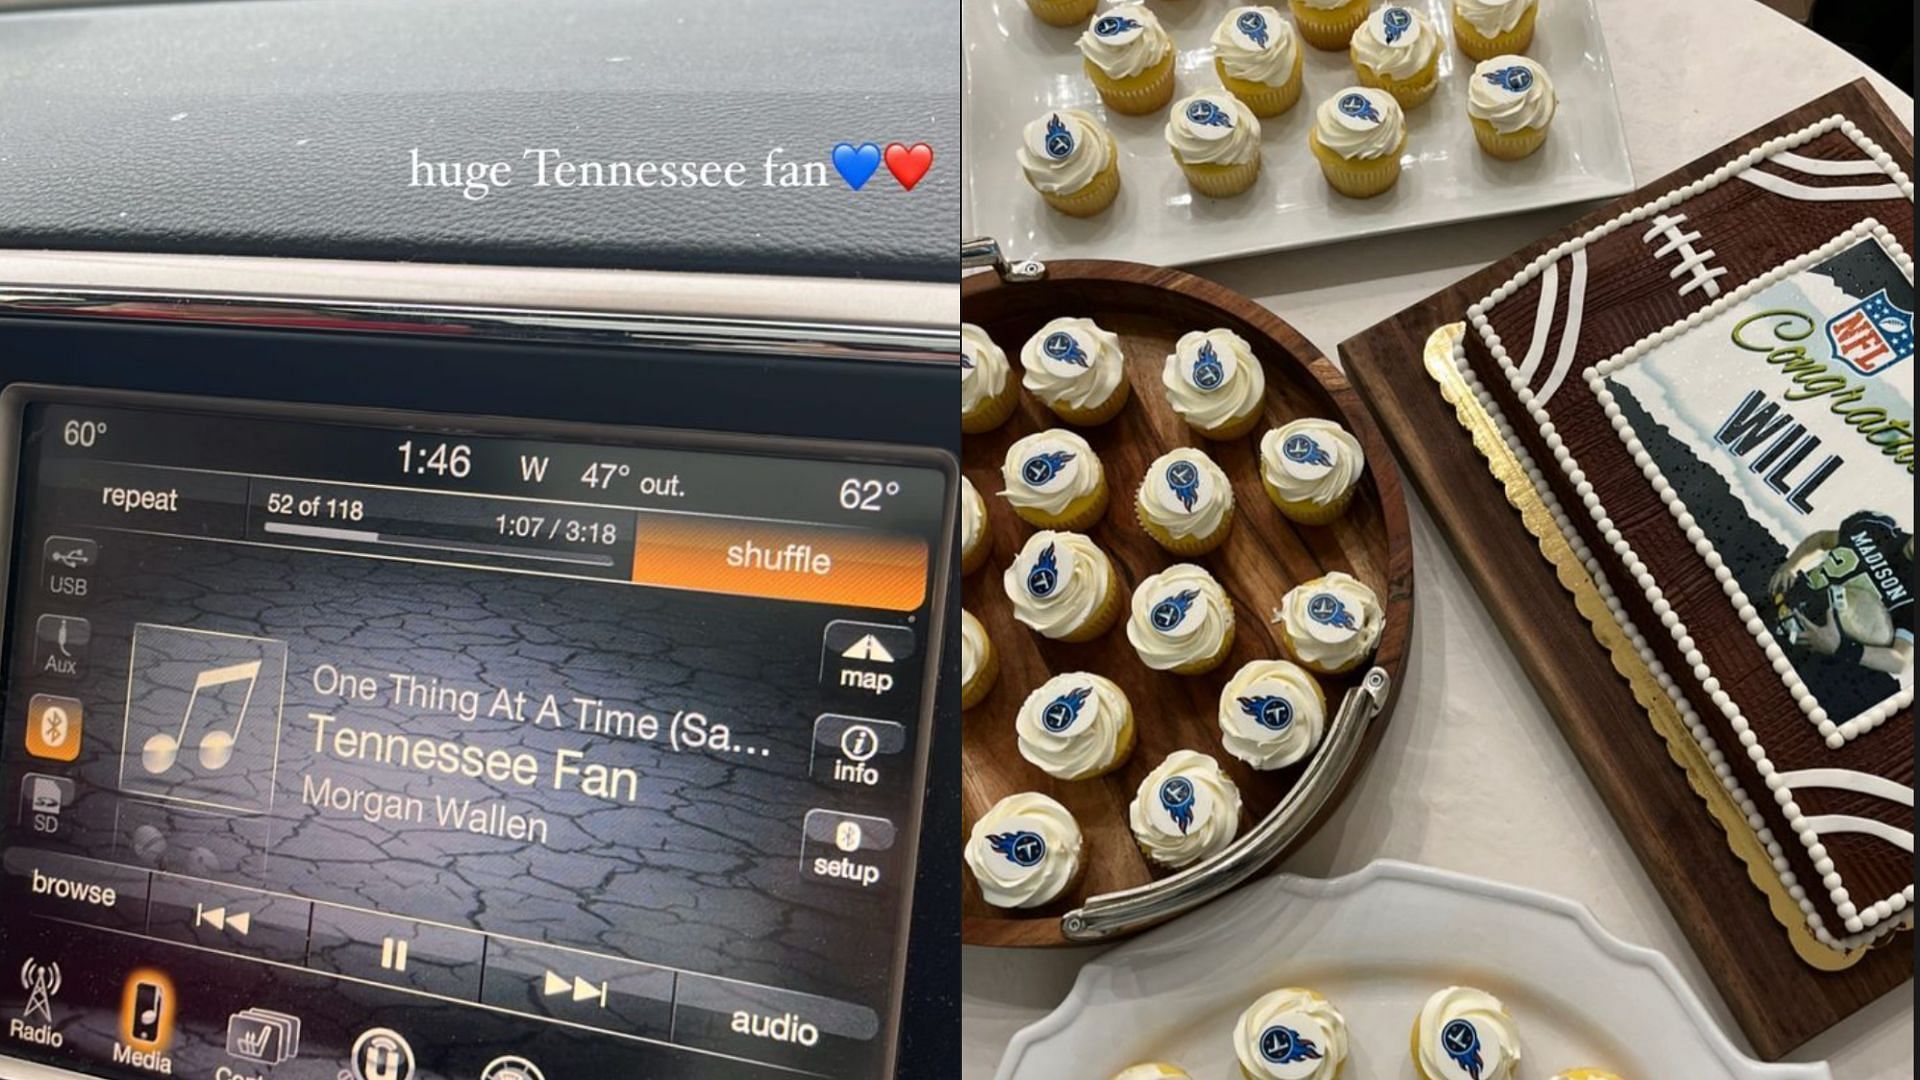 Duddy shows off a song by Morgan Waller and some Titans-inspired cupcakes. Credit: @giaduddy (IG)